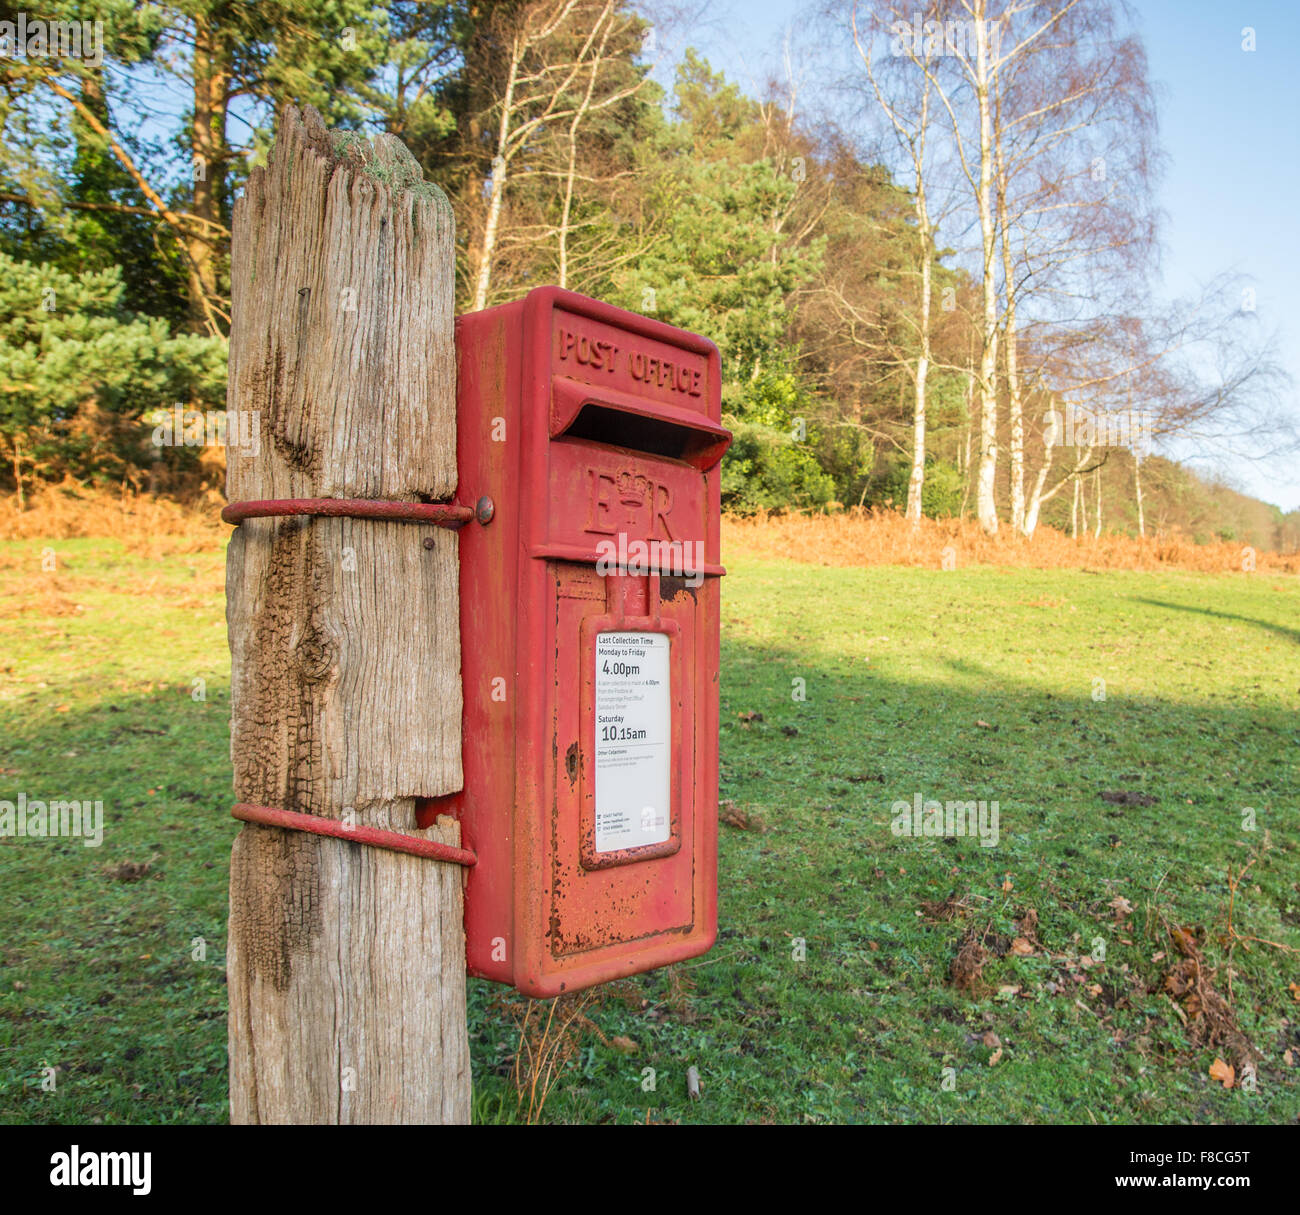 Royal Mail Poster collection fort dans un emplacement rural, New Forest, Hampshire. Banque D'Images